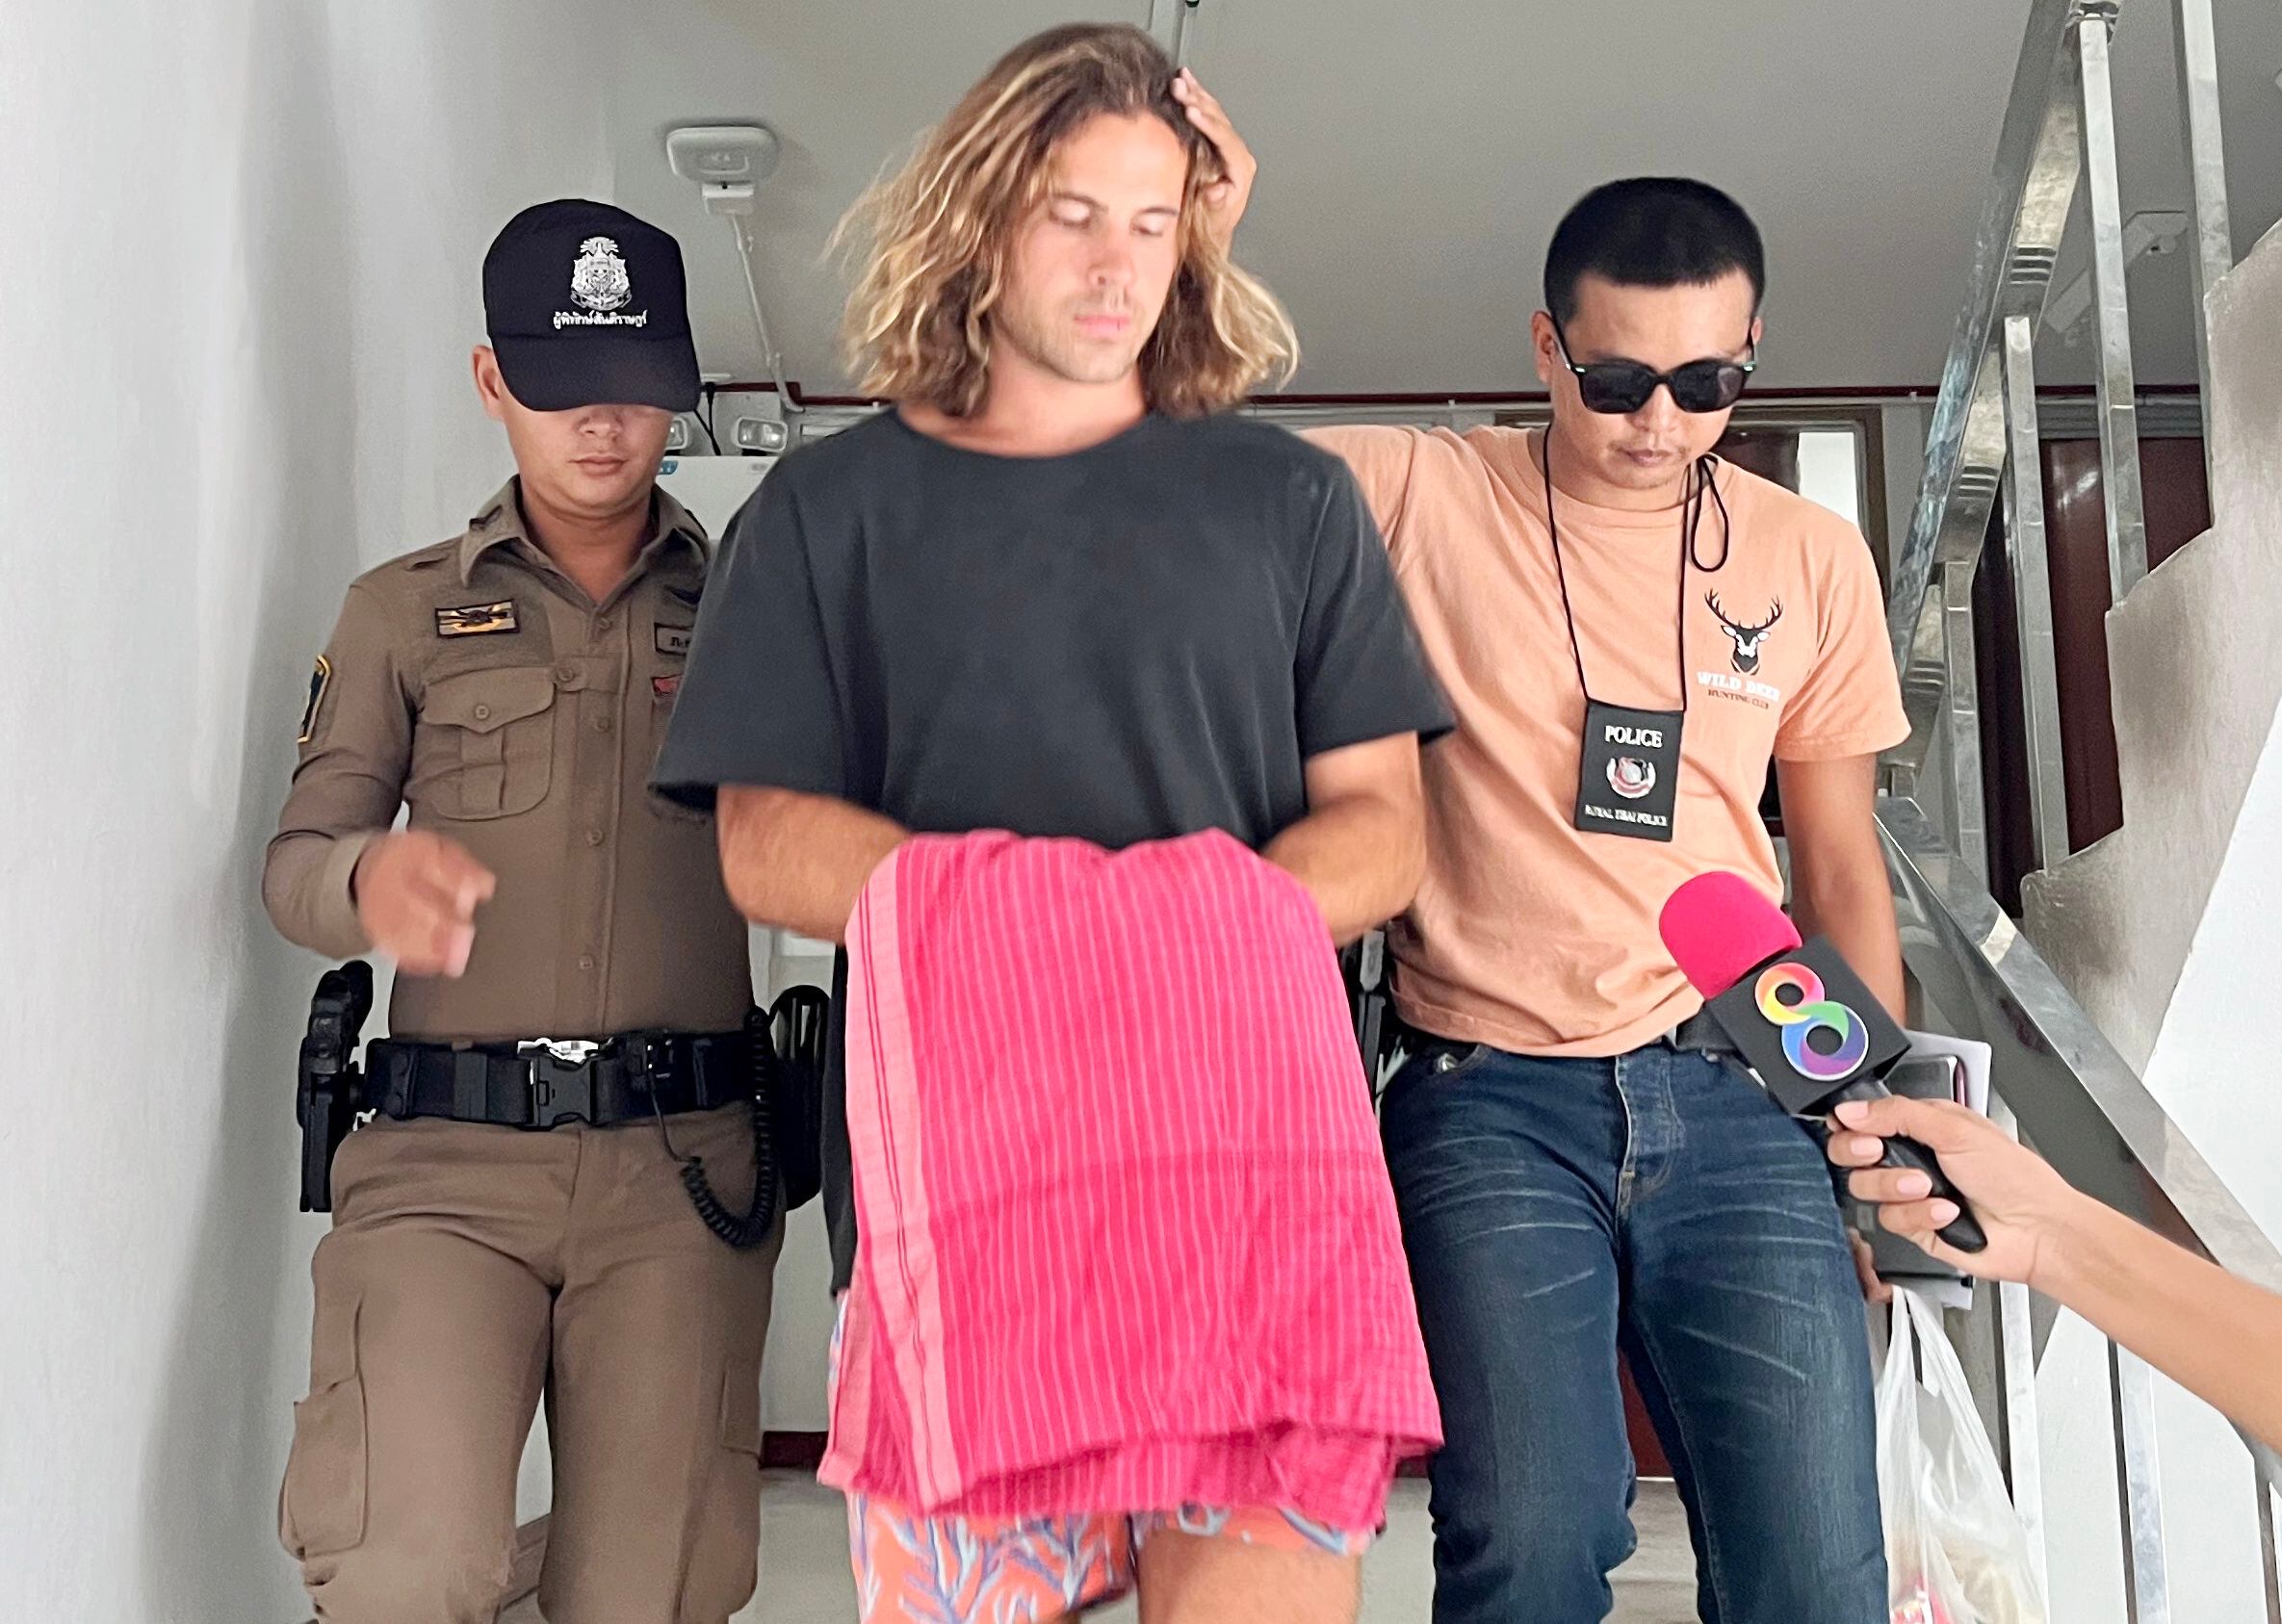 Koh Phangan (Thailand), 07/08/2023.- A Spanish chef alleged murder suspect Daniel Jeronimo Sancho Bronchalo (C), is escorted by Thai police officers to the court from Koh Phangan police station in Koh Phangan island, southern Thailand, 07 August 2023. Thai police arrested a 29-year-old Spanish nationality Daniel Jeronimo Sancho Bronchalo accused of killing a Colombian surgeon Edwin Arrieta Arteaga and dismembering his body before dumping some parts in a rubbish dump and other parts including his head in the sea, police said. (España, Tailandia) EFE/EPA/SOMKEAT RUKSAMAN
